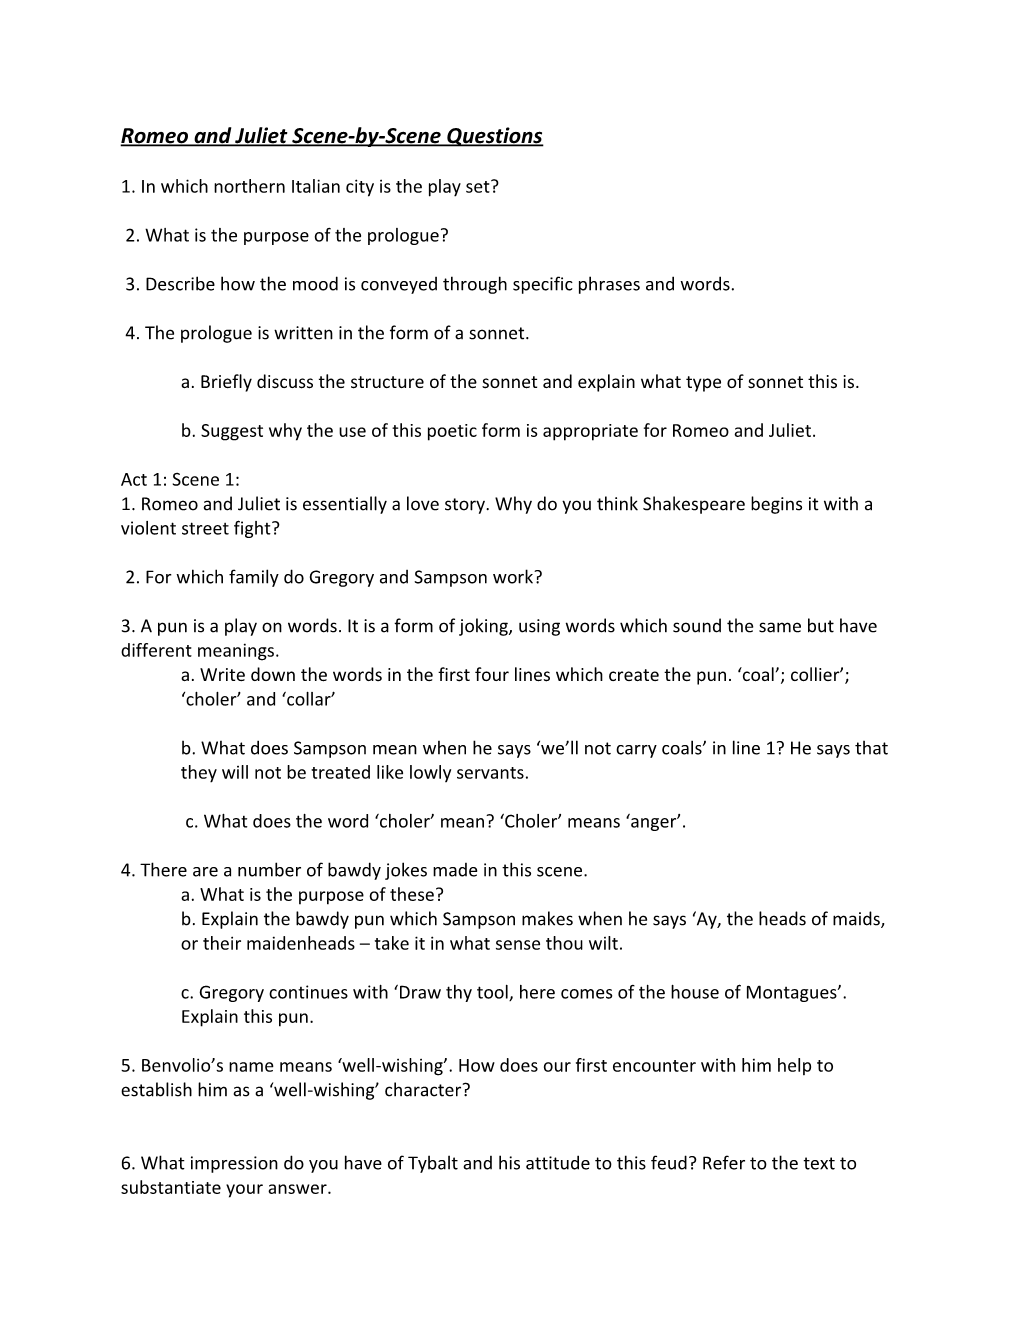 Romeo and Juliet Scene-By-Scene Questions